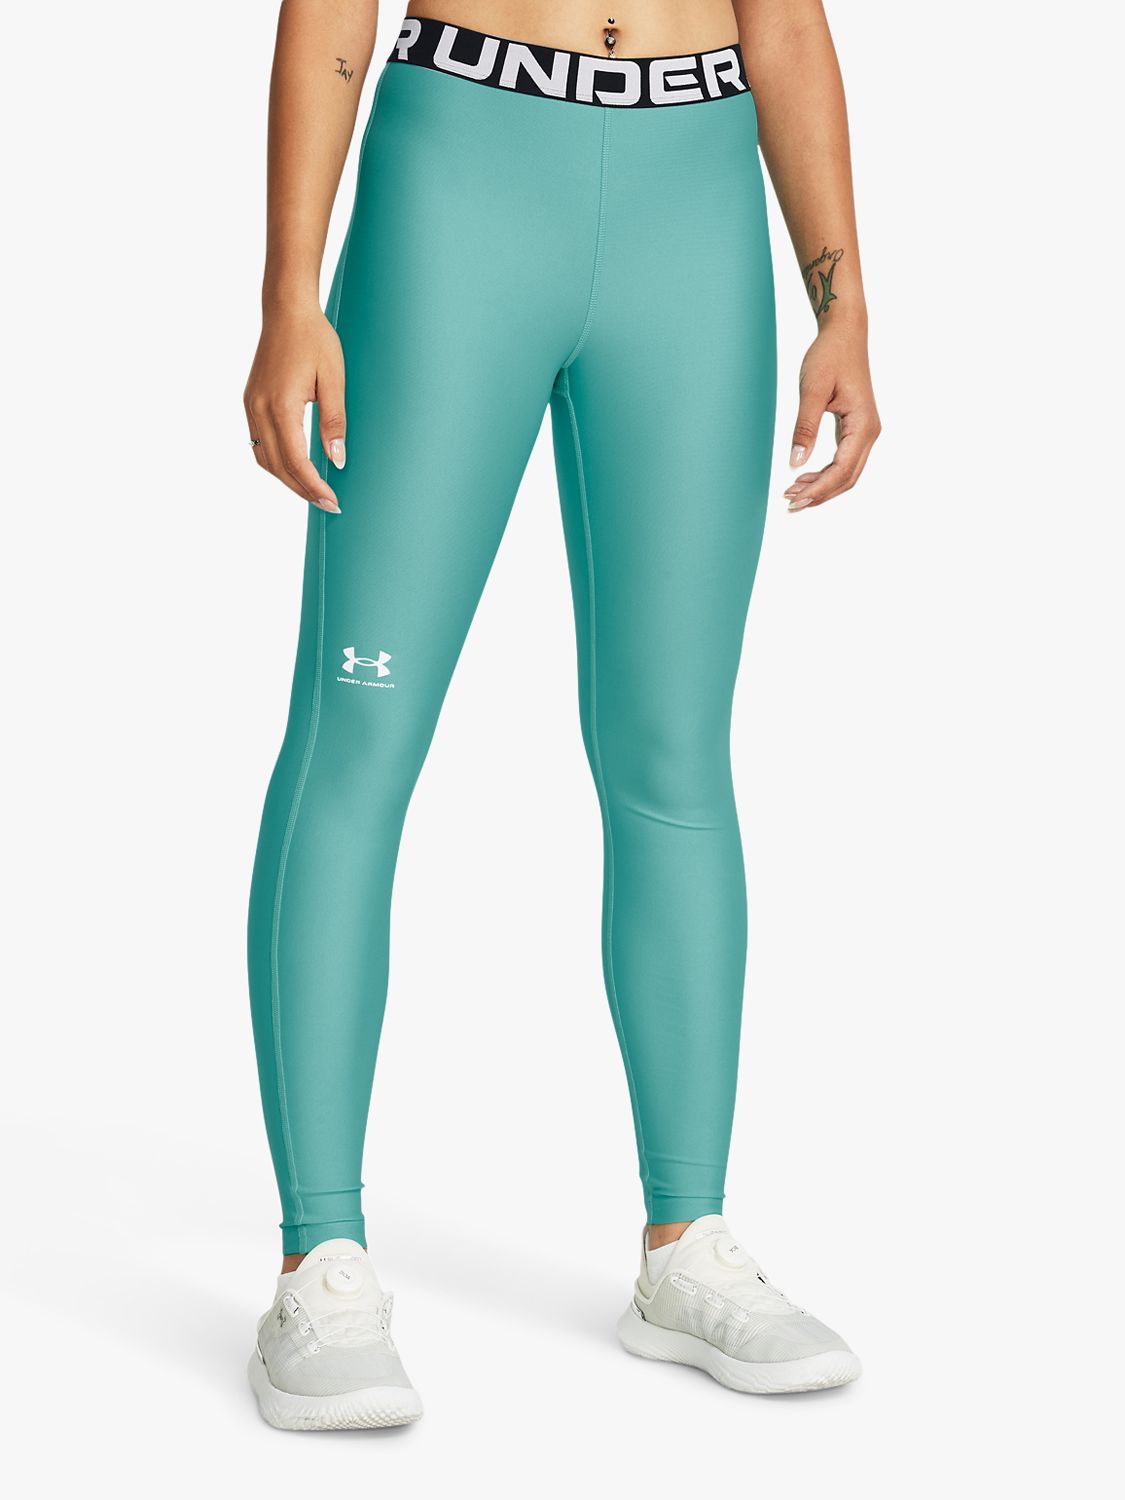 Under Armour Heat Gear Gym Leggings, Turquoise/White, XS